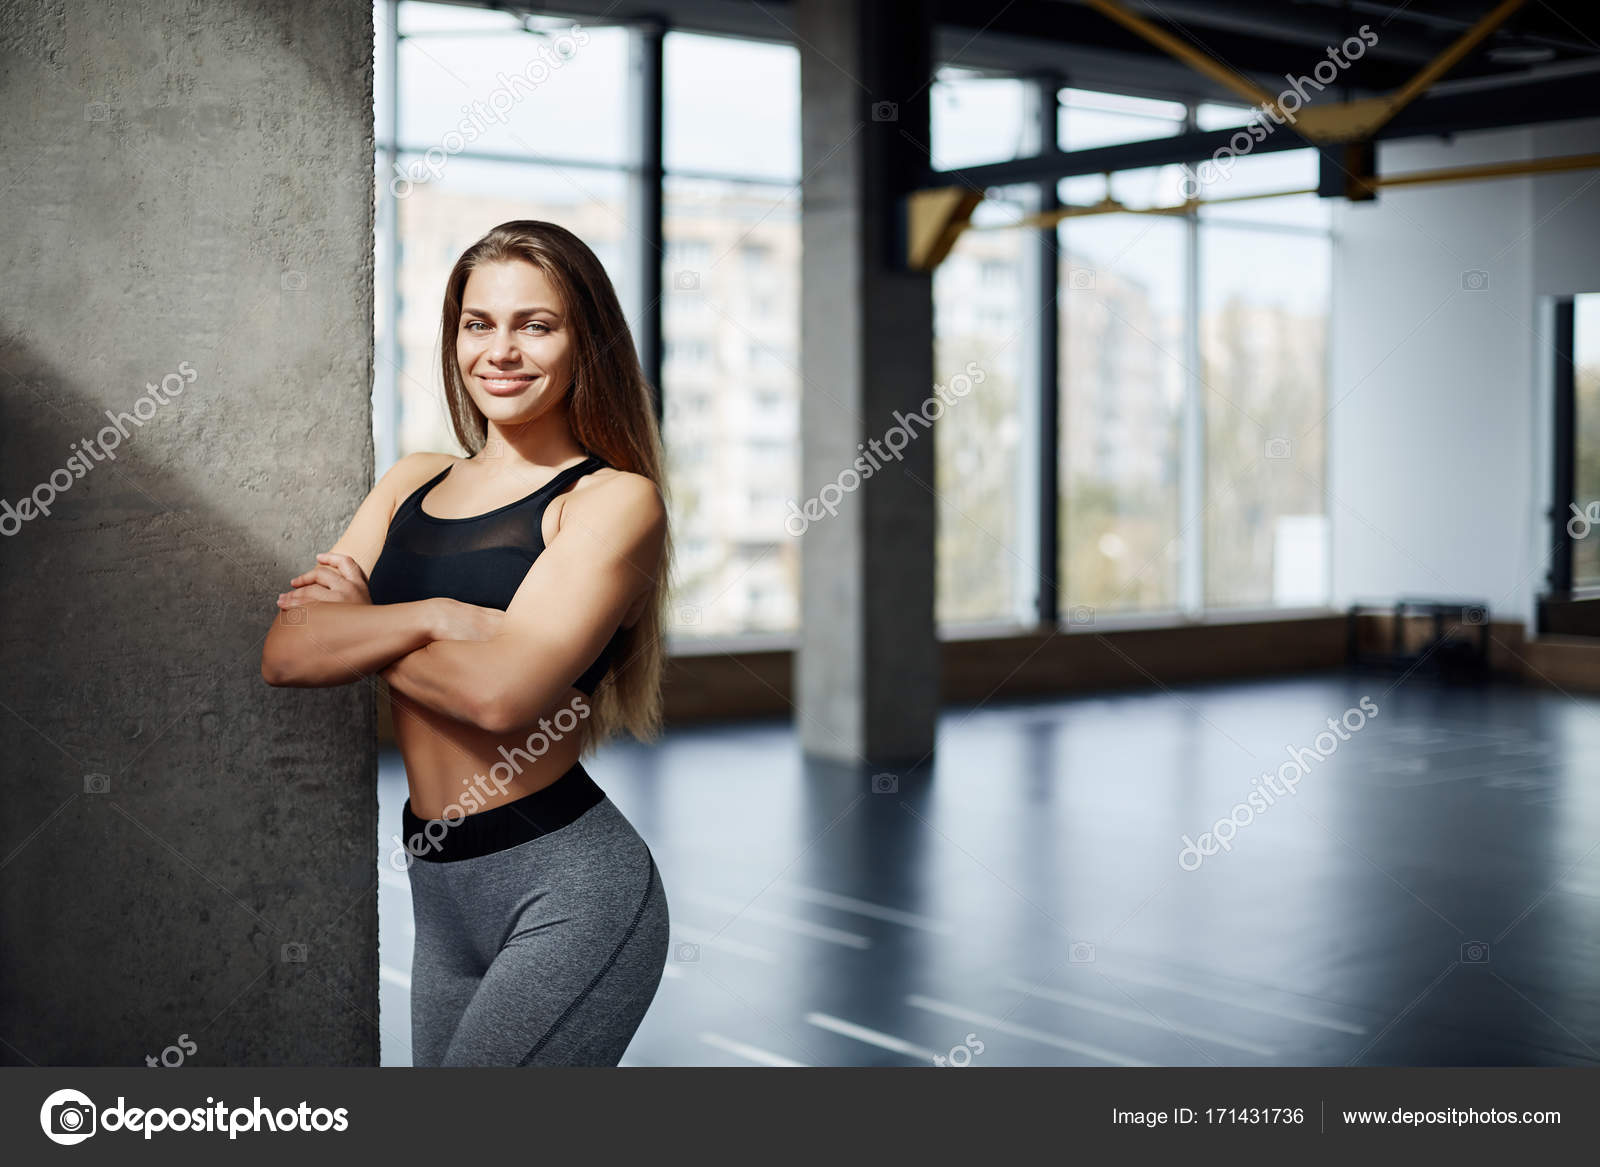 Perfect Fitness Body of Beautiful Woman. Fitness Instructor in